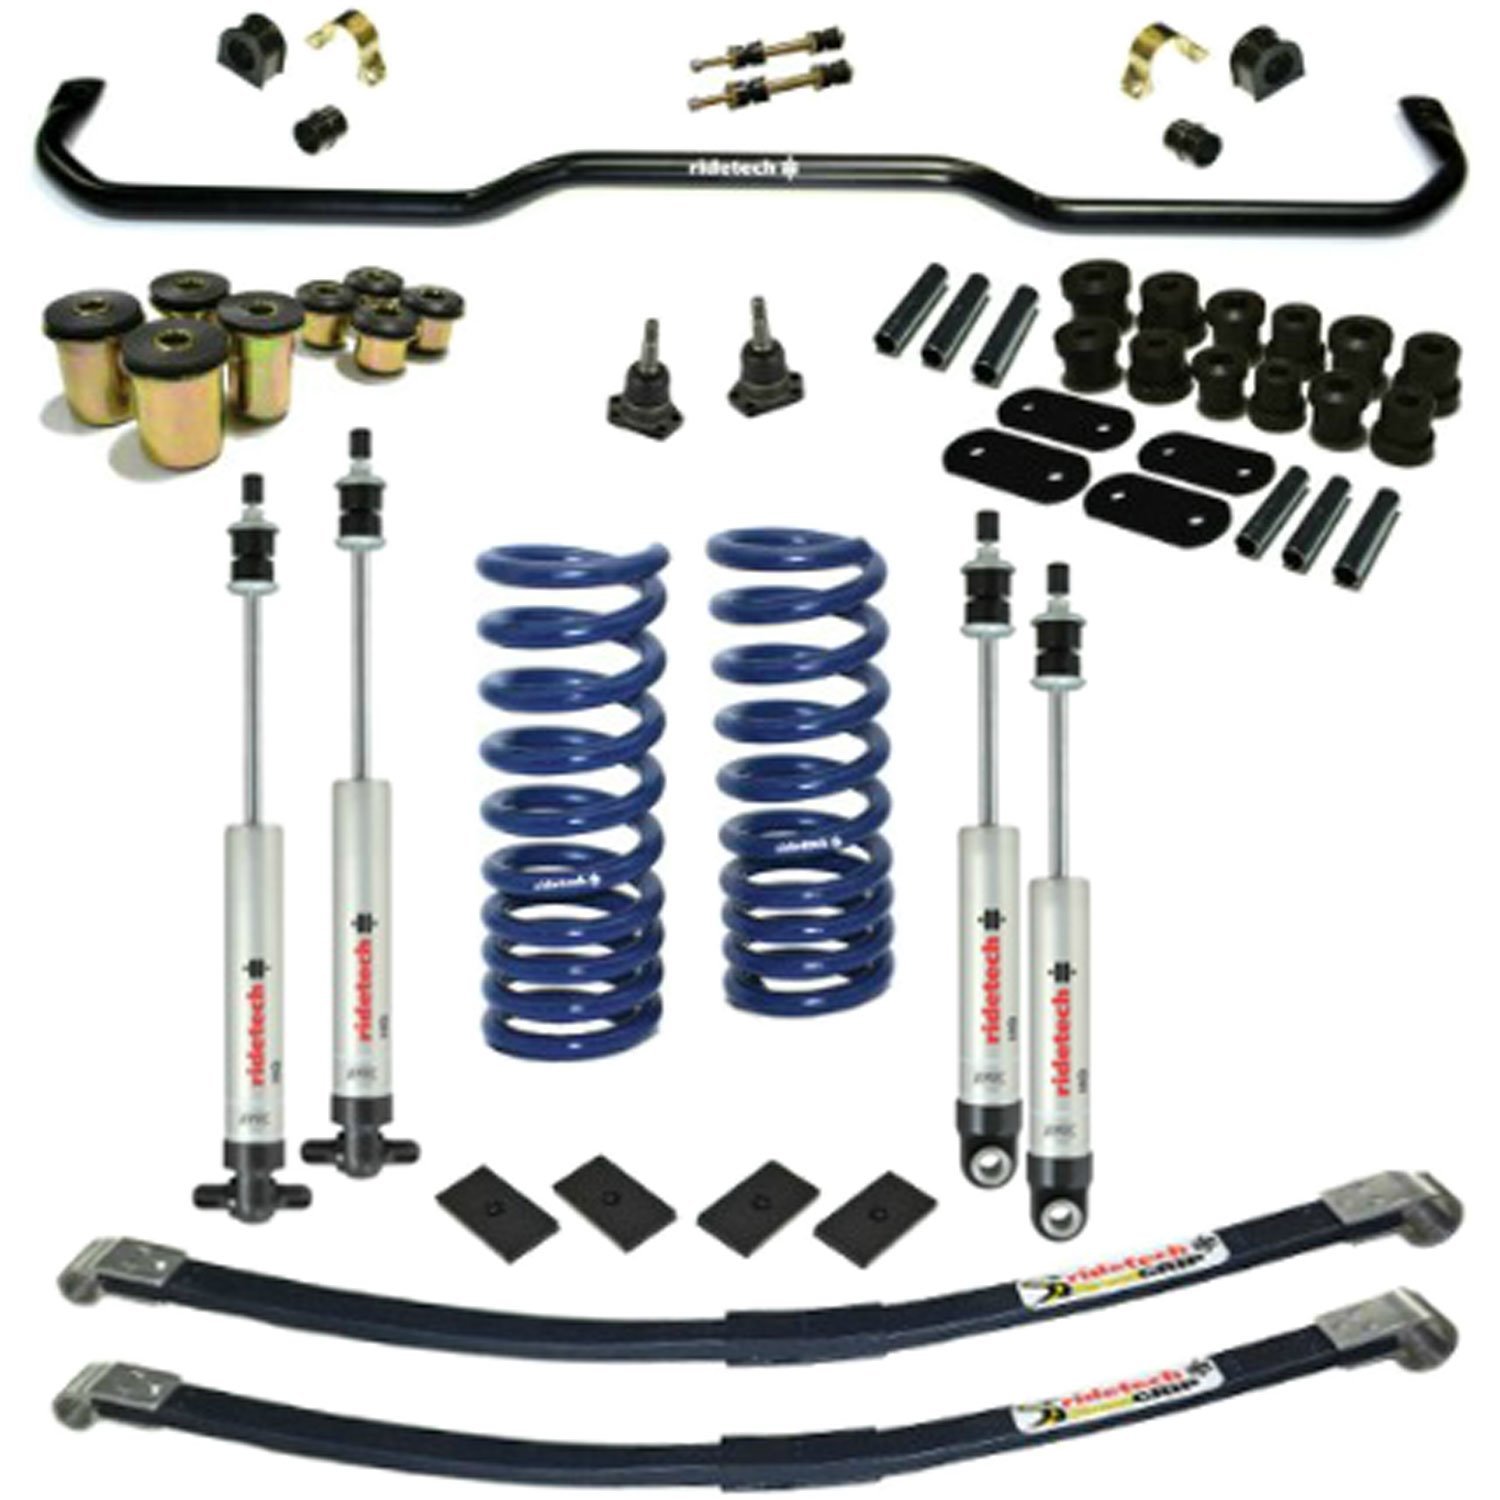 11265010 StreetGrip Suspension System for 1968-1974 Chevy Nova w/Small Block or GM LS Engine (w/Bushings & Ball Joints)